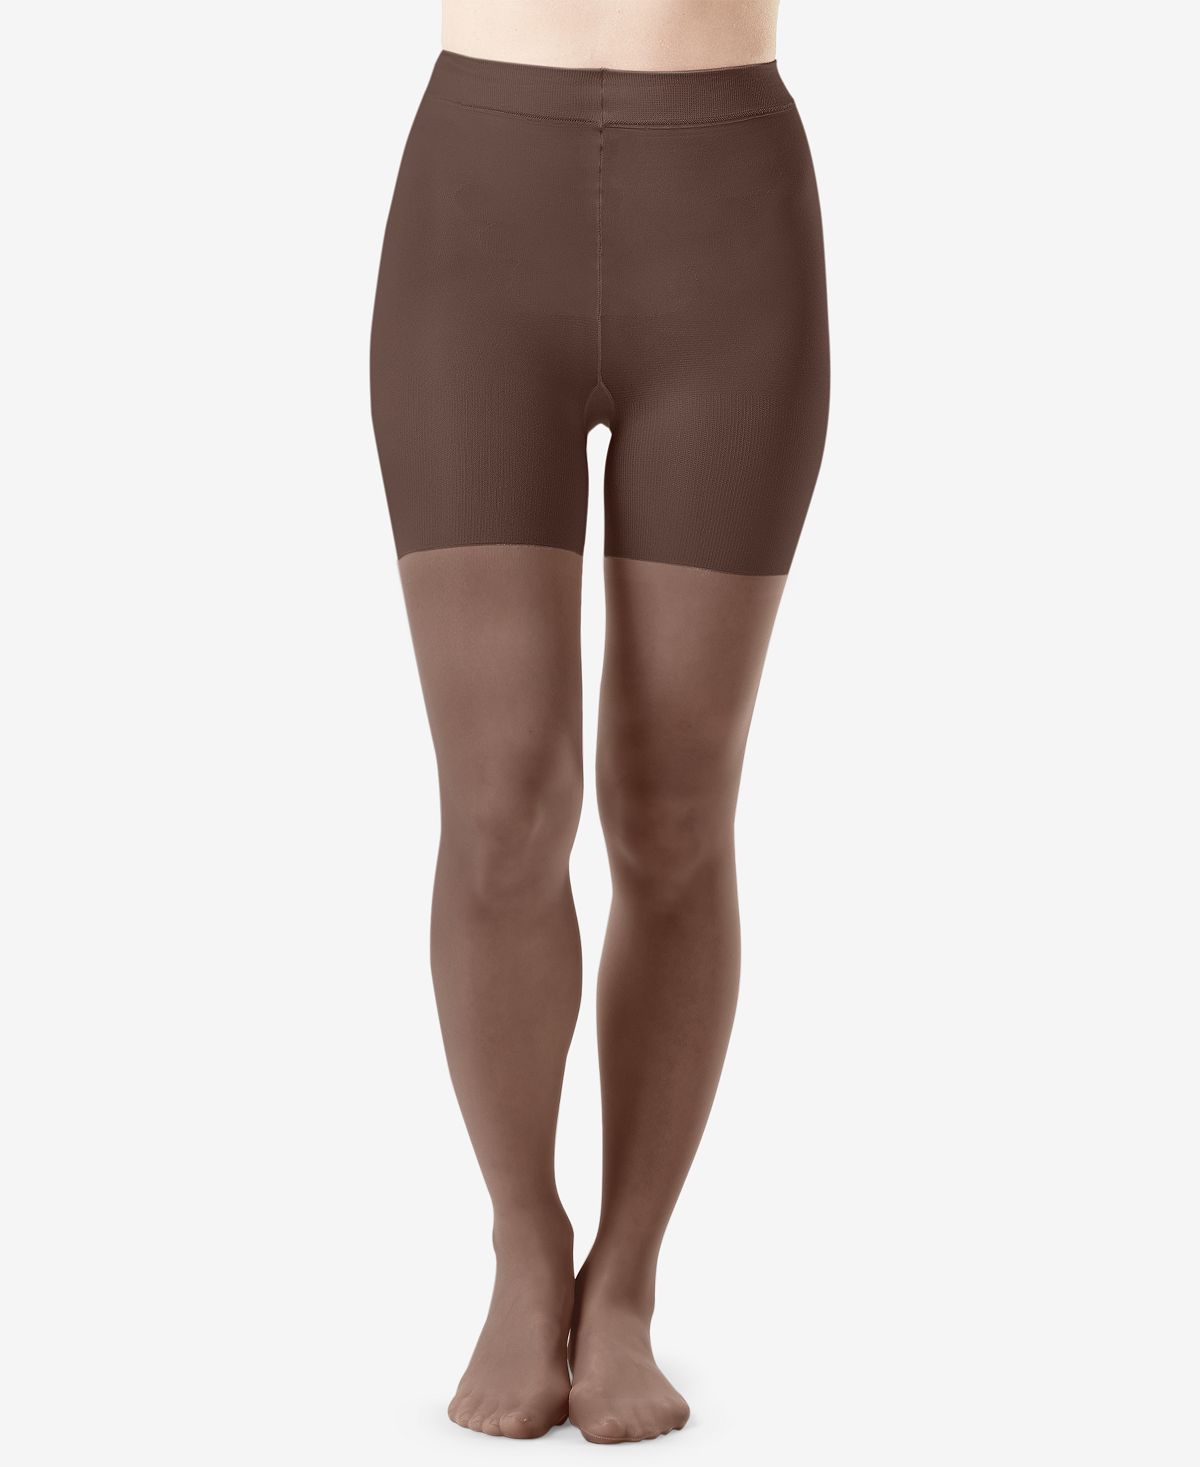 http://www.cheapundies.com/cdn/shop/products/Spanx-remarkable-Relief-Pantyhose-Sheers-S7_126362_8386dcb4-922f-40e5-b62a-207f311d707e.jpg?v=1683812005